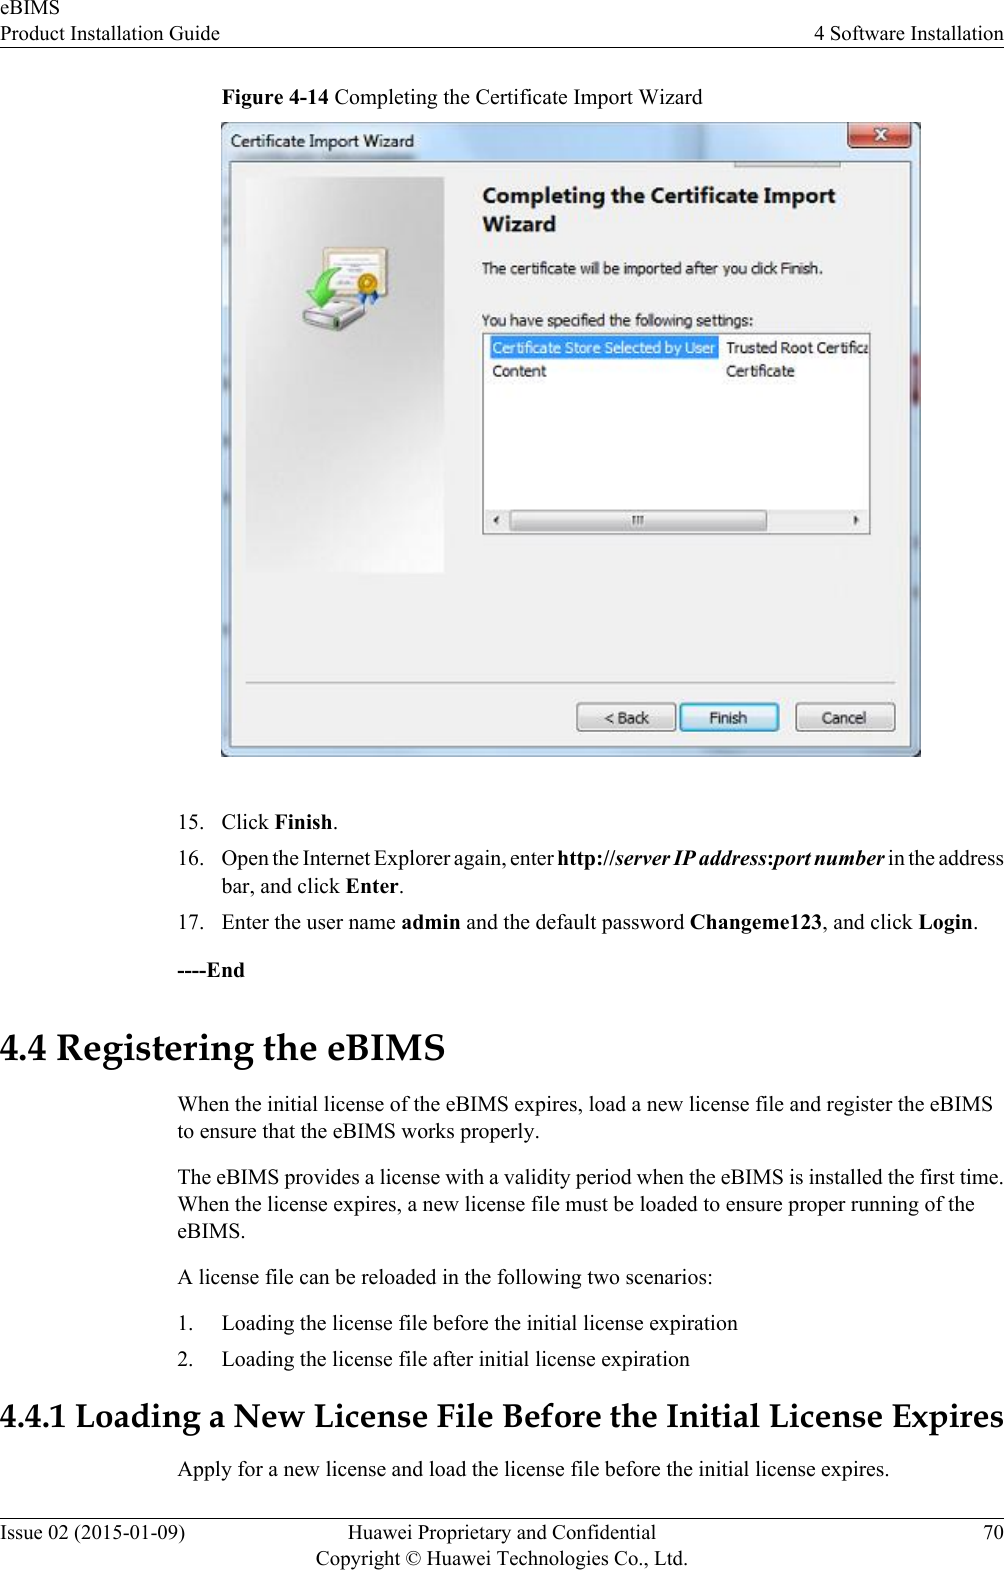 Figure 4-14 Completing the Certificate Import Wizard15. Click Finish.16. Open the Internet Explorer again, enter http://server IP address:port number in the addressbar, and click Enter.17. Enter the user name admin and the default password Changeme123, and click Login.----End4.4 Registering the eBIMSWhen the initial license of the eBIMS expires, load a new license file and register the eBIMSto ensure that the eBIMS works properly.The eBIMS provides a license with a validity period when the eBIMS is installed the first time.When the license expires, a new license file must be loaded to ensure proper running of theeBIMS.A license file can be reloaded in the following two scenarios:1. Loading the license file before the initial license expiration2. Loading the license file after initial license expiration4.4.1 Loading a New License File Before the Initial License ExpiresApply for a new license and load the license file before the initial license expires.eBIMSProduct Installation Guide 4 Software InstallationIssue 02 (2015-01-09) Huawei Proprietary and ConfidentialCopyright © Huawei Technologies Co., Ltd.70